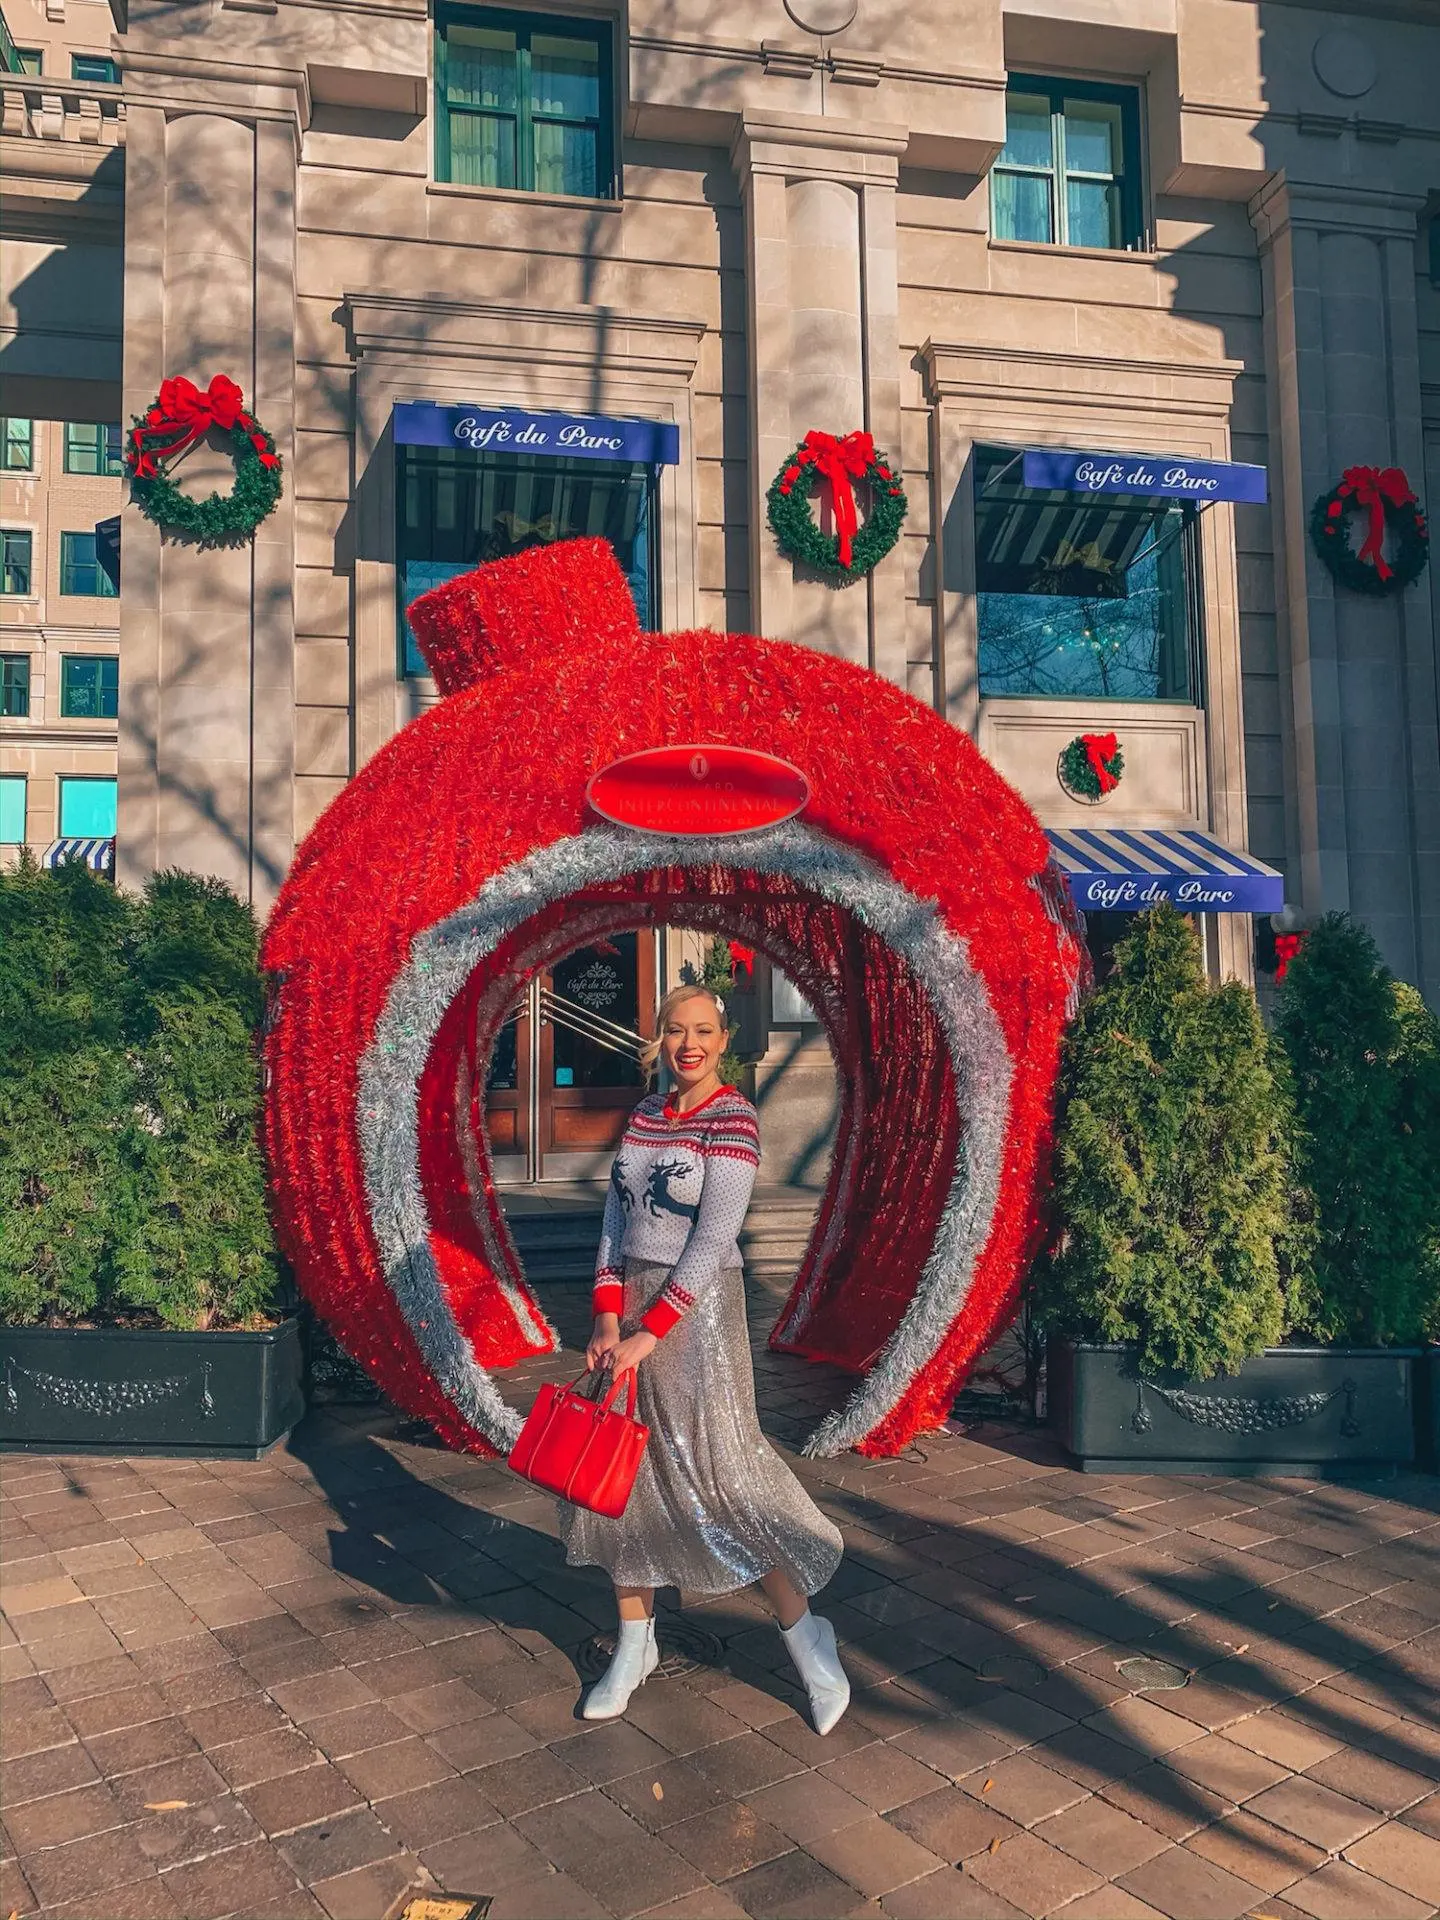 Explore the festive decorations downtown Washington DC at Christmas time. There's so much to see everywhere!